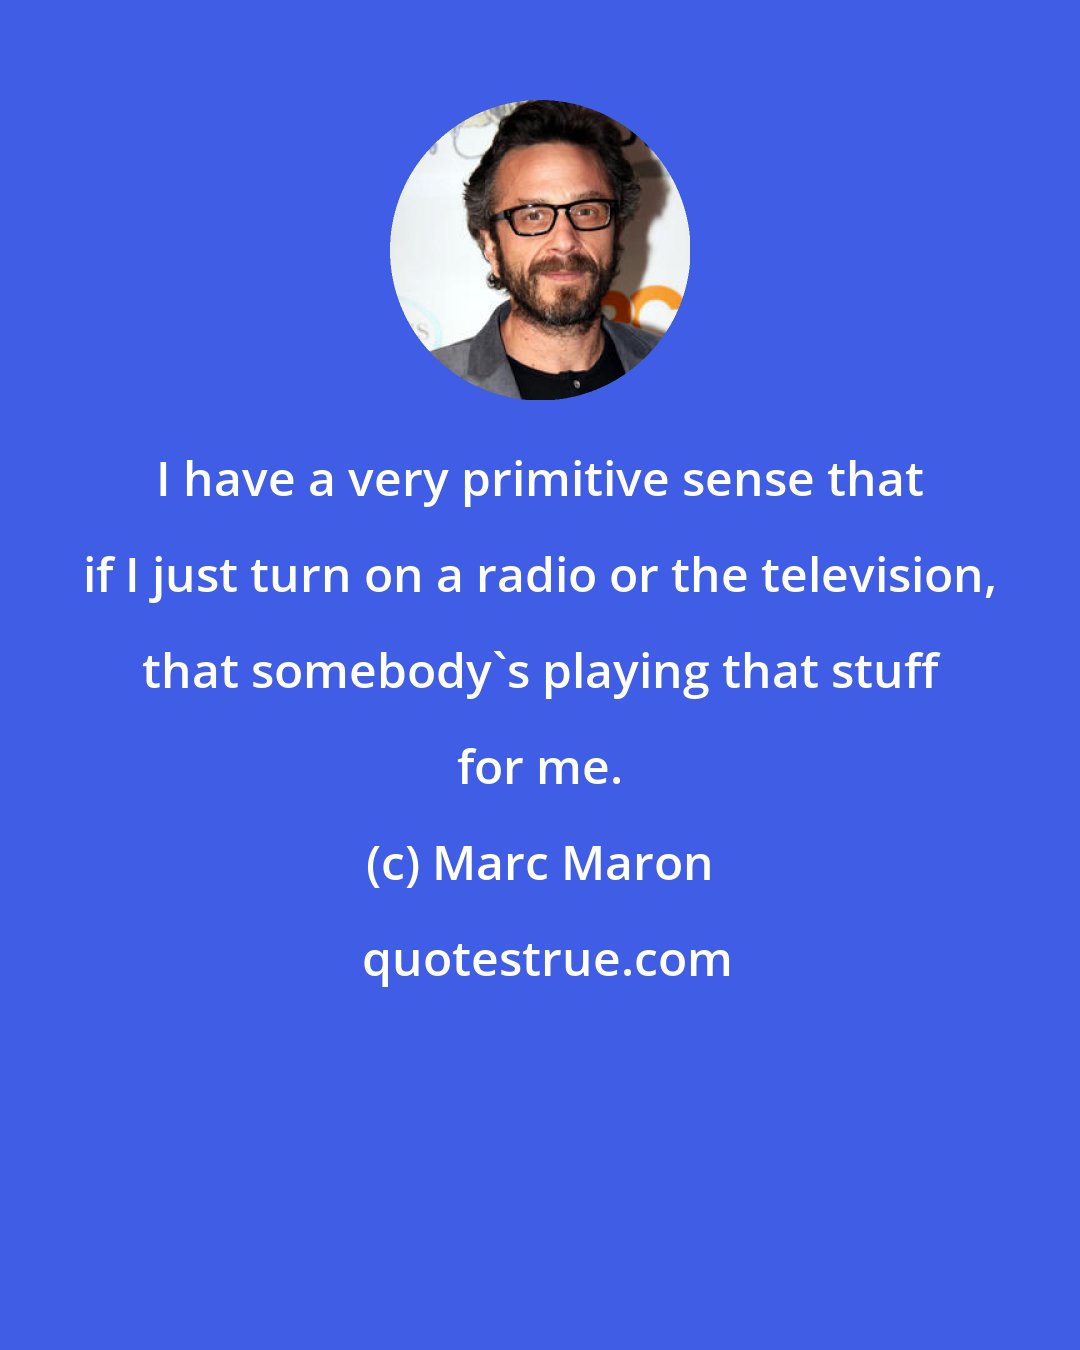 Marc Maron: I have a very primitive sense that if I just turn on a radio or the television, that somebody's playing that stuff for me.